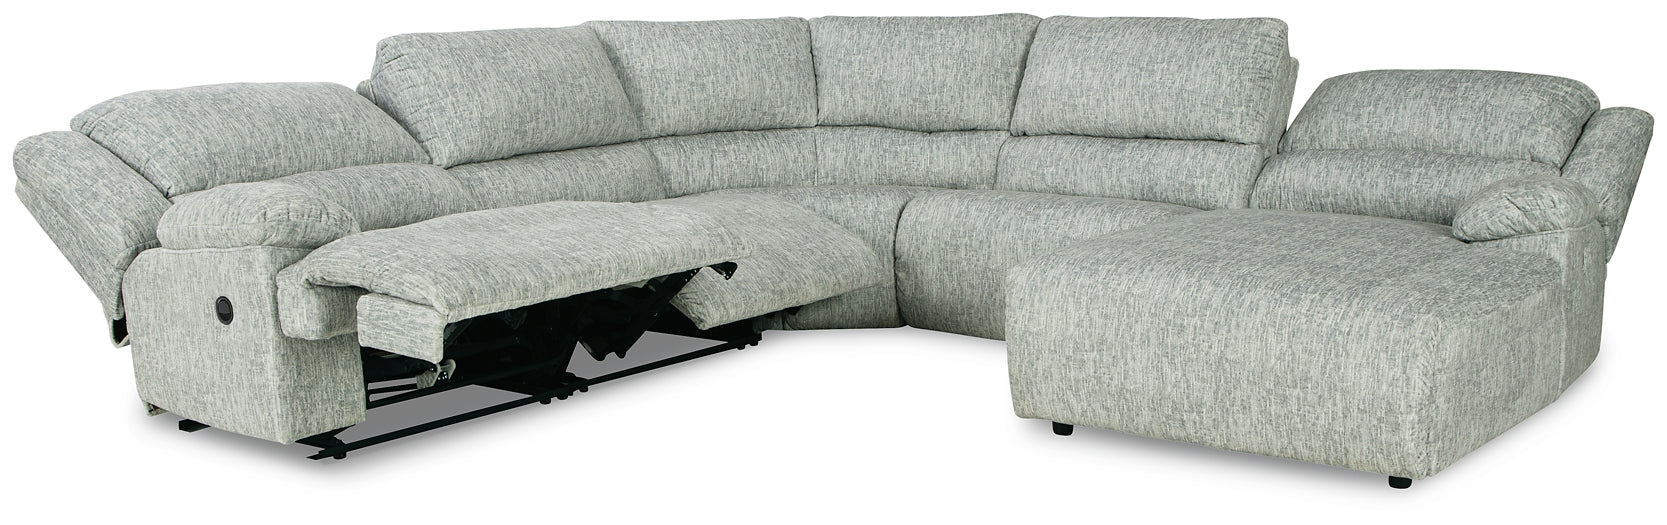 McClelland 5-Piece Reclining Sectional with Chaise